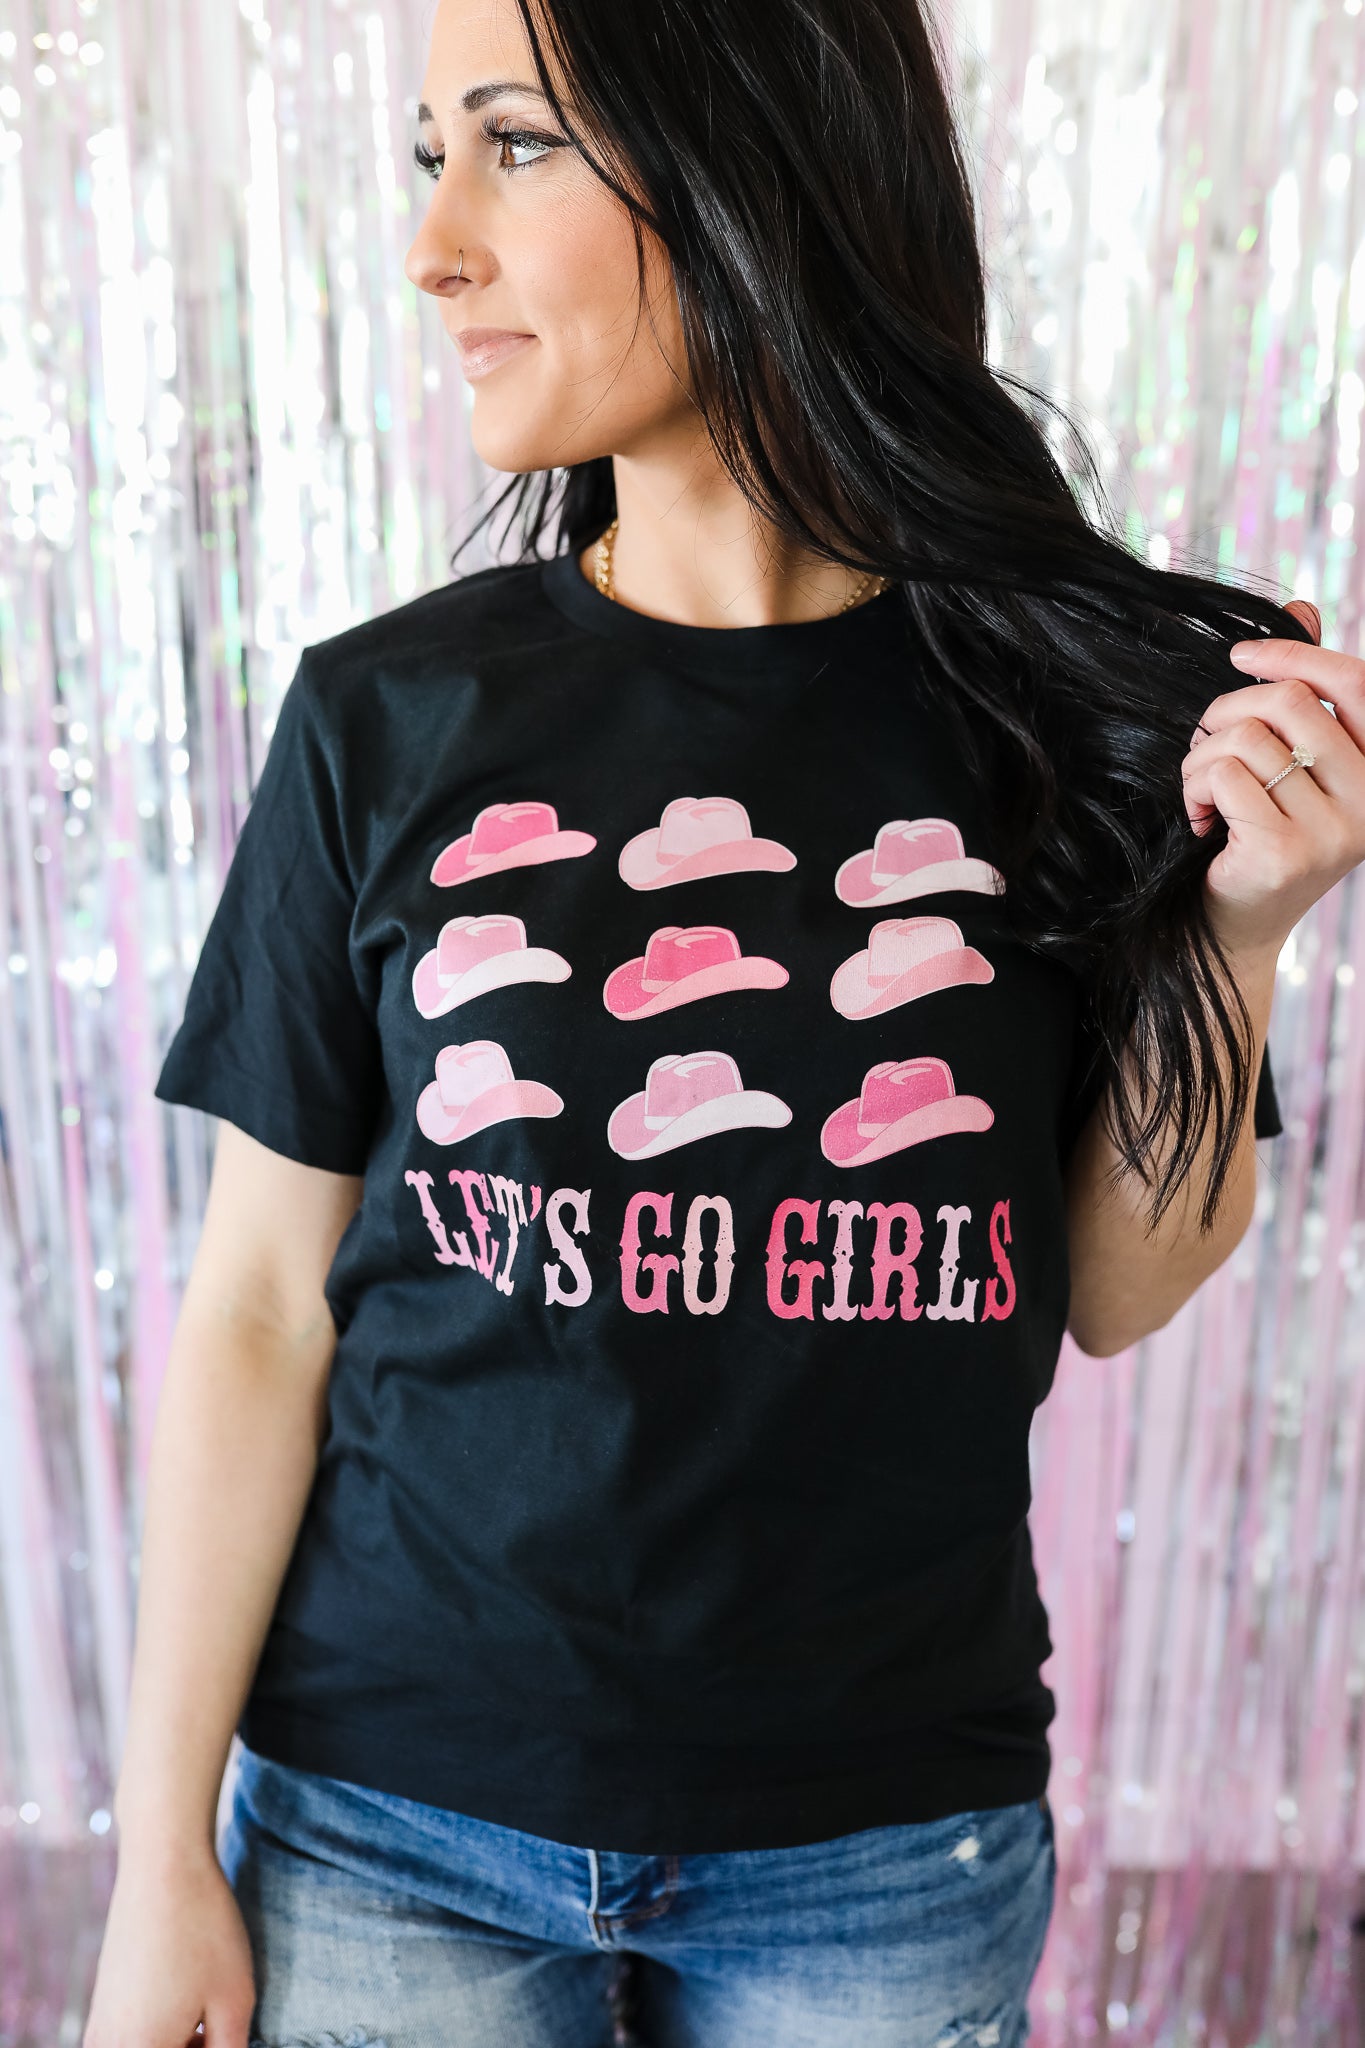 Let's Go Girls Hats Graphic Tee - Black